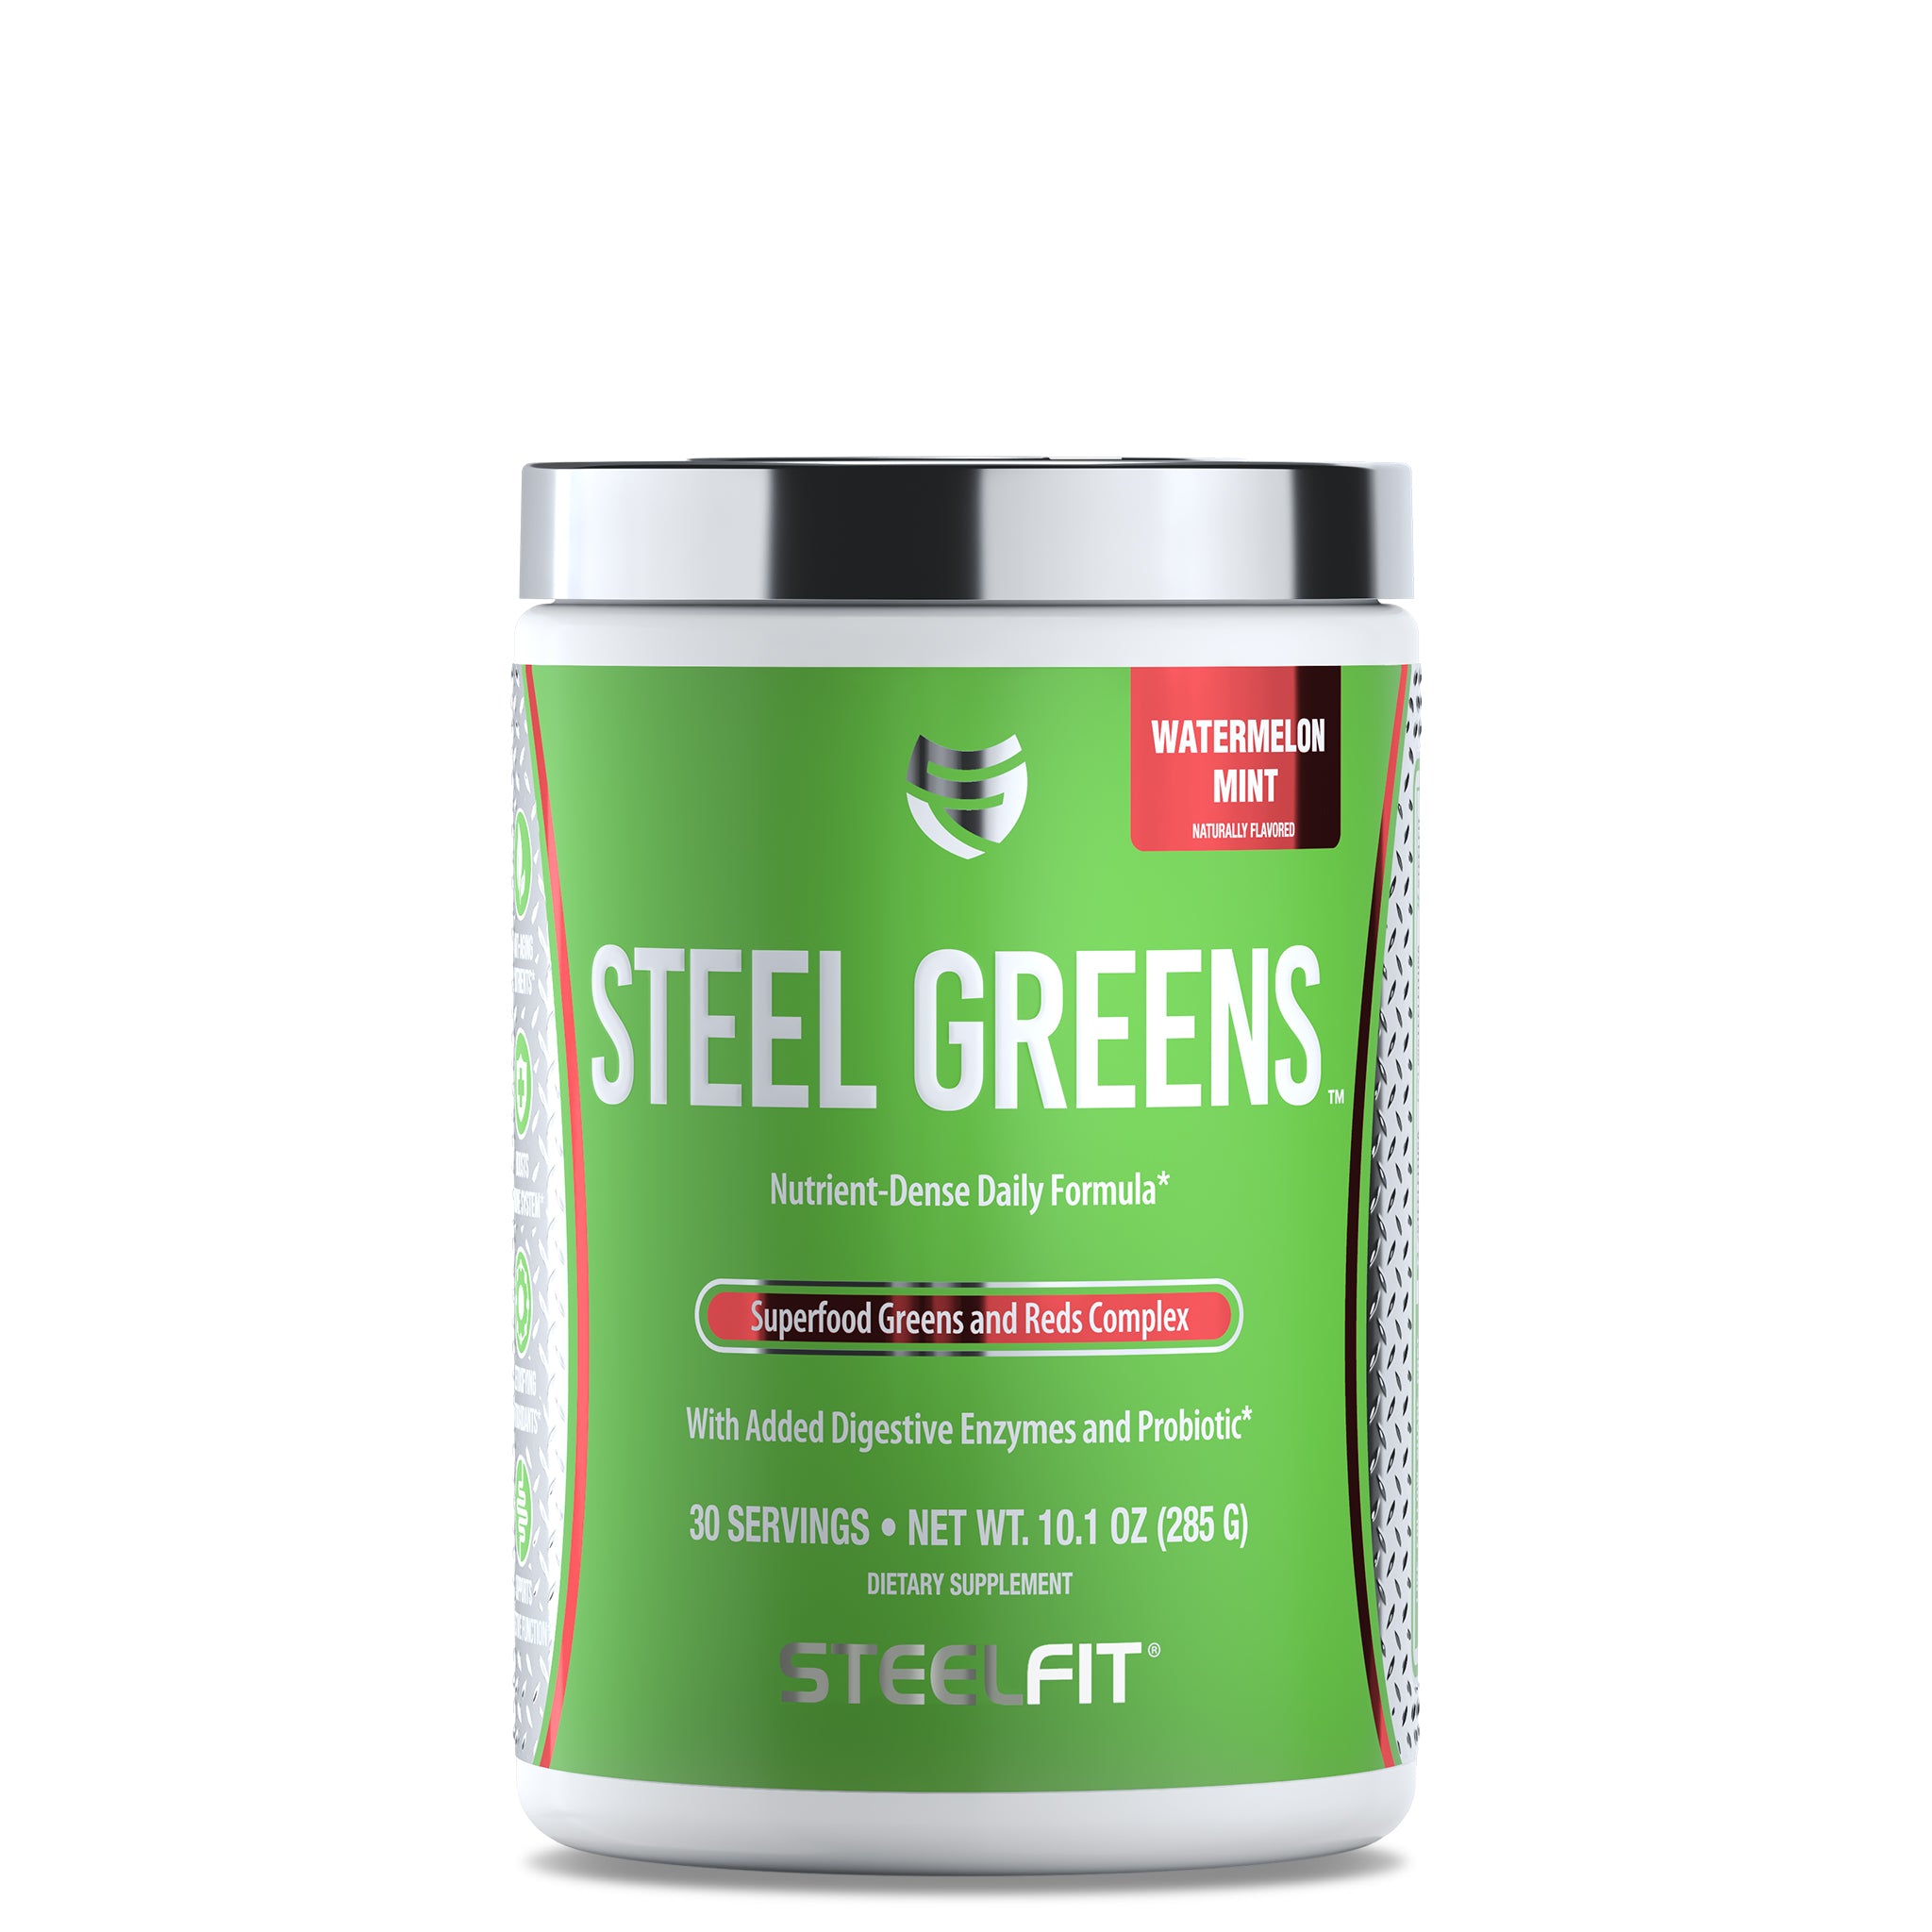 green superfood supplement, green superfood supplements, green superfood powder, watermelon mint